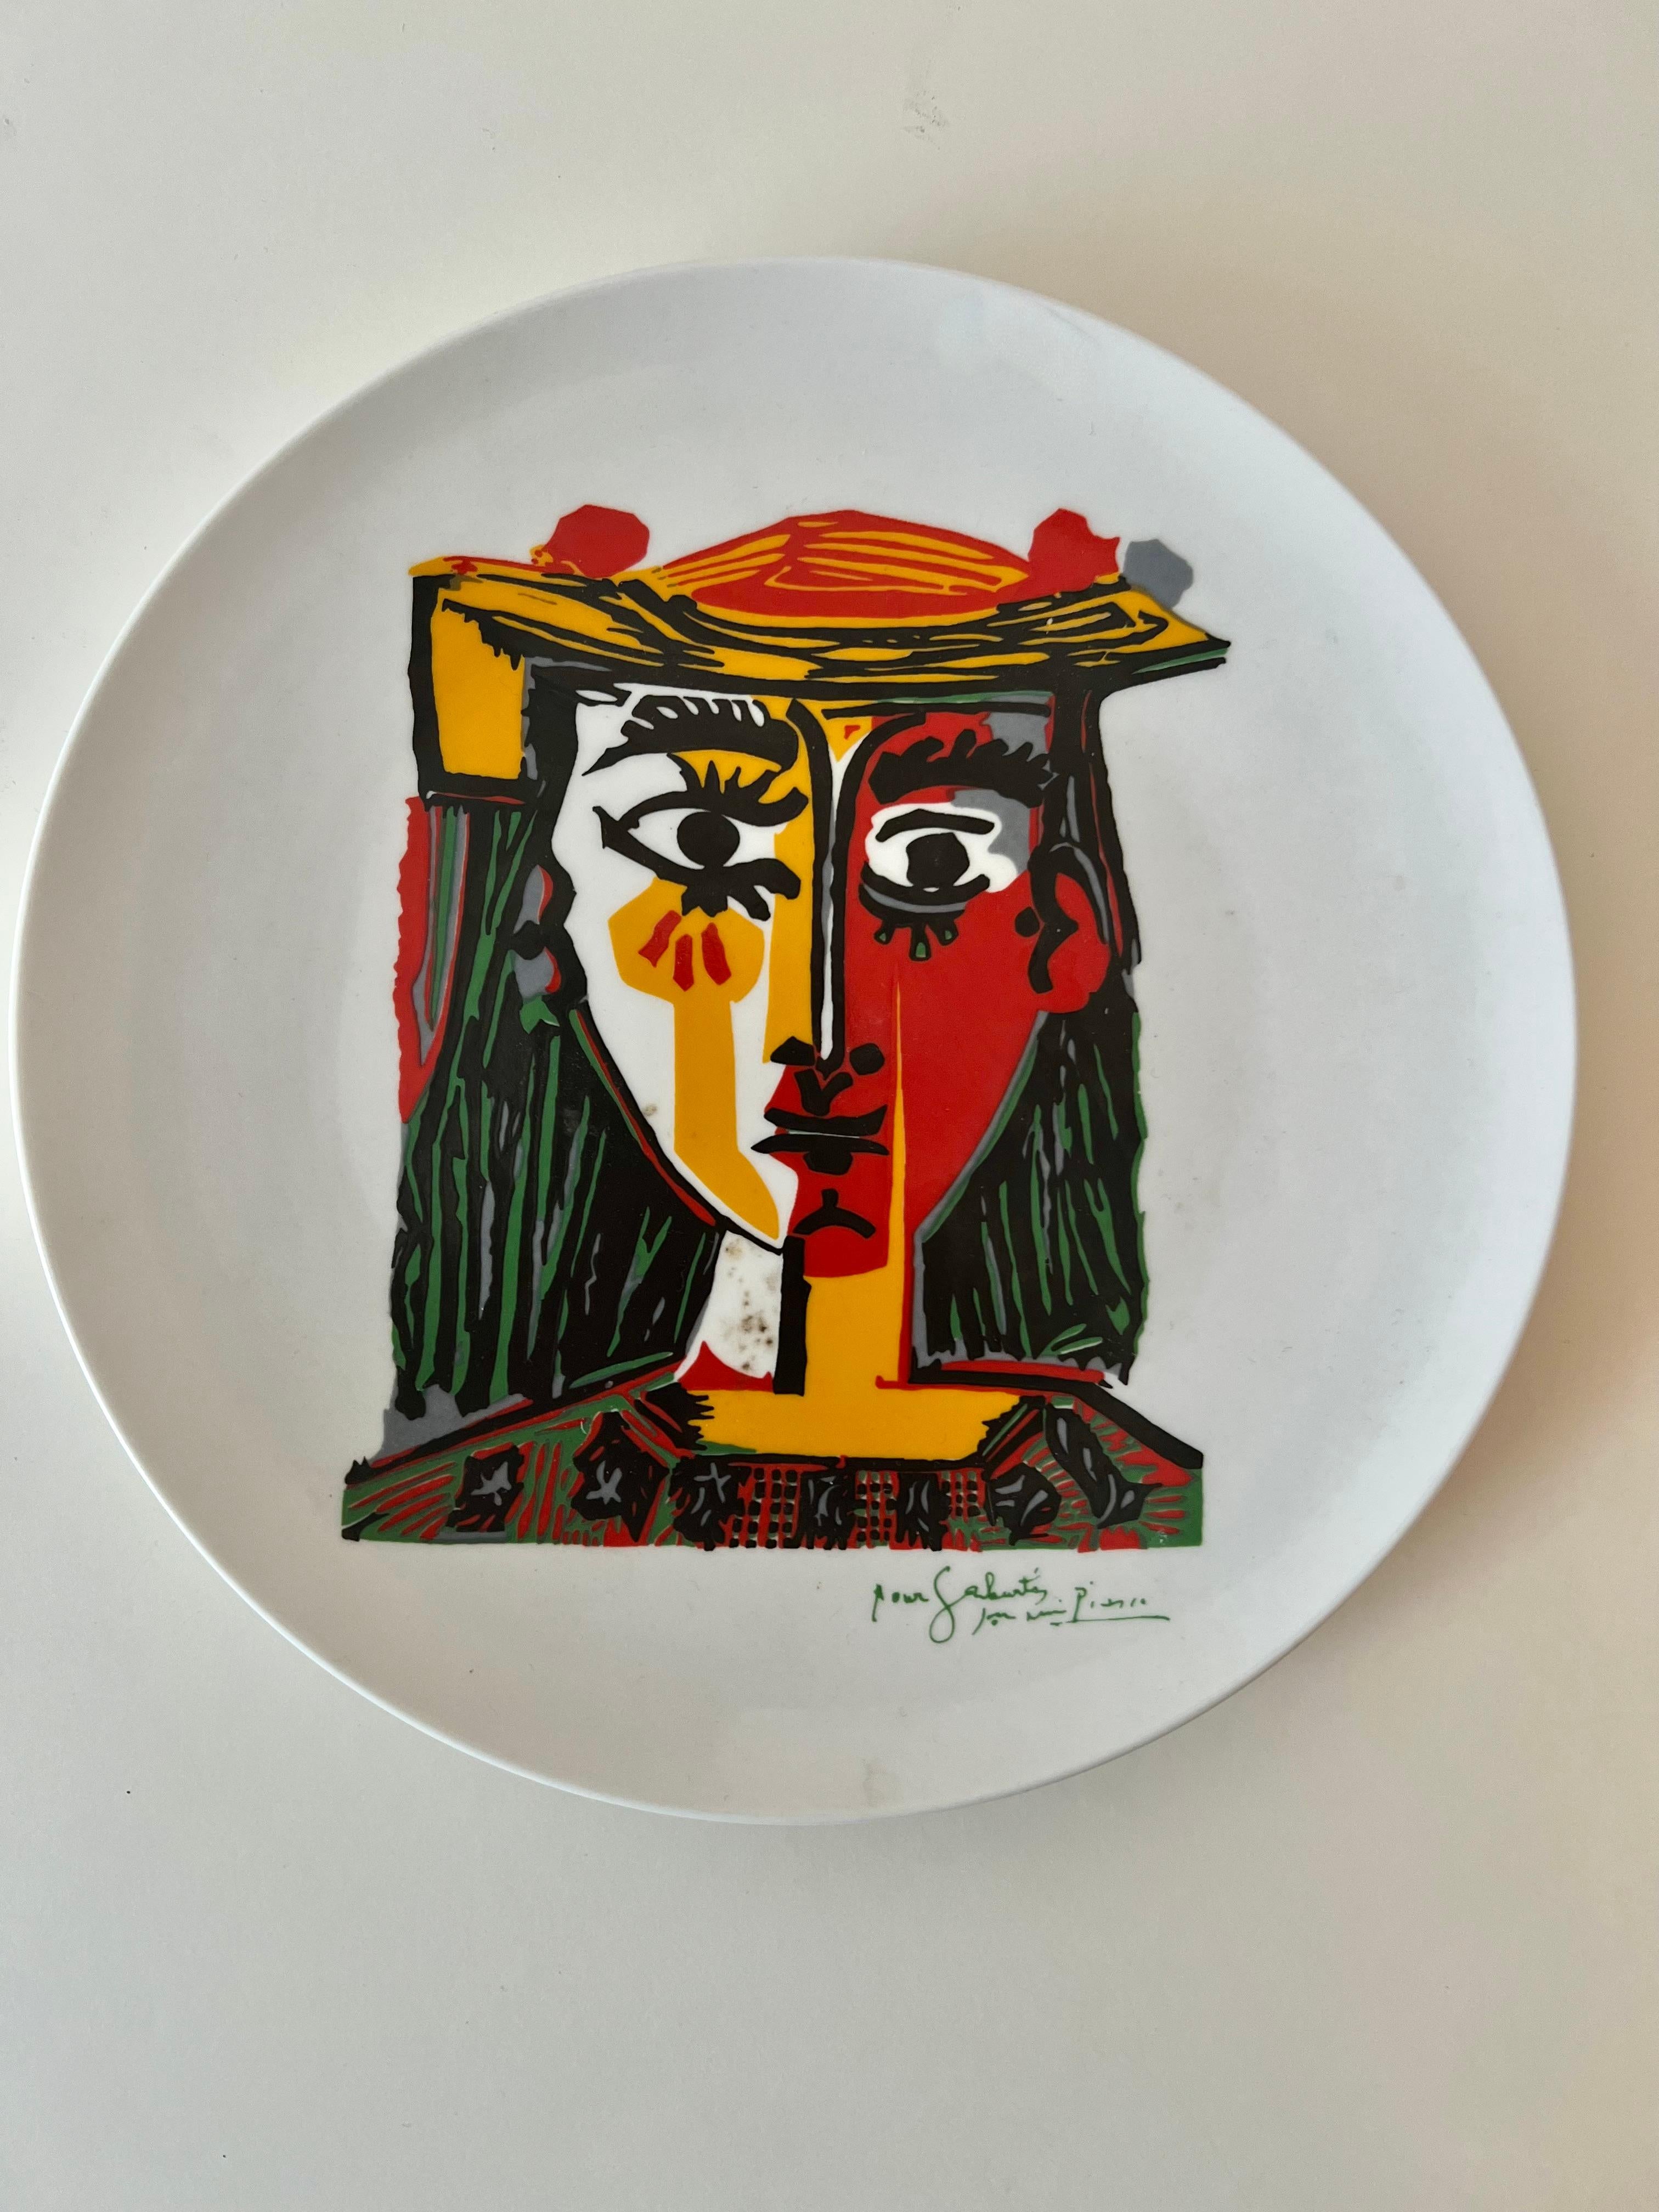 A Painted plate with the Picasso image. The plate would be a nice decorative piece to a cocktail table or grouping on a table or wall. the vivid colors are very modern and relative. Porcelain with no chips or cracks.